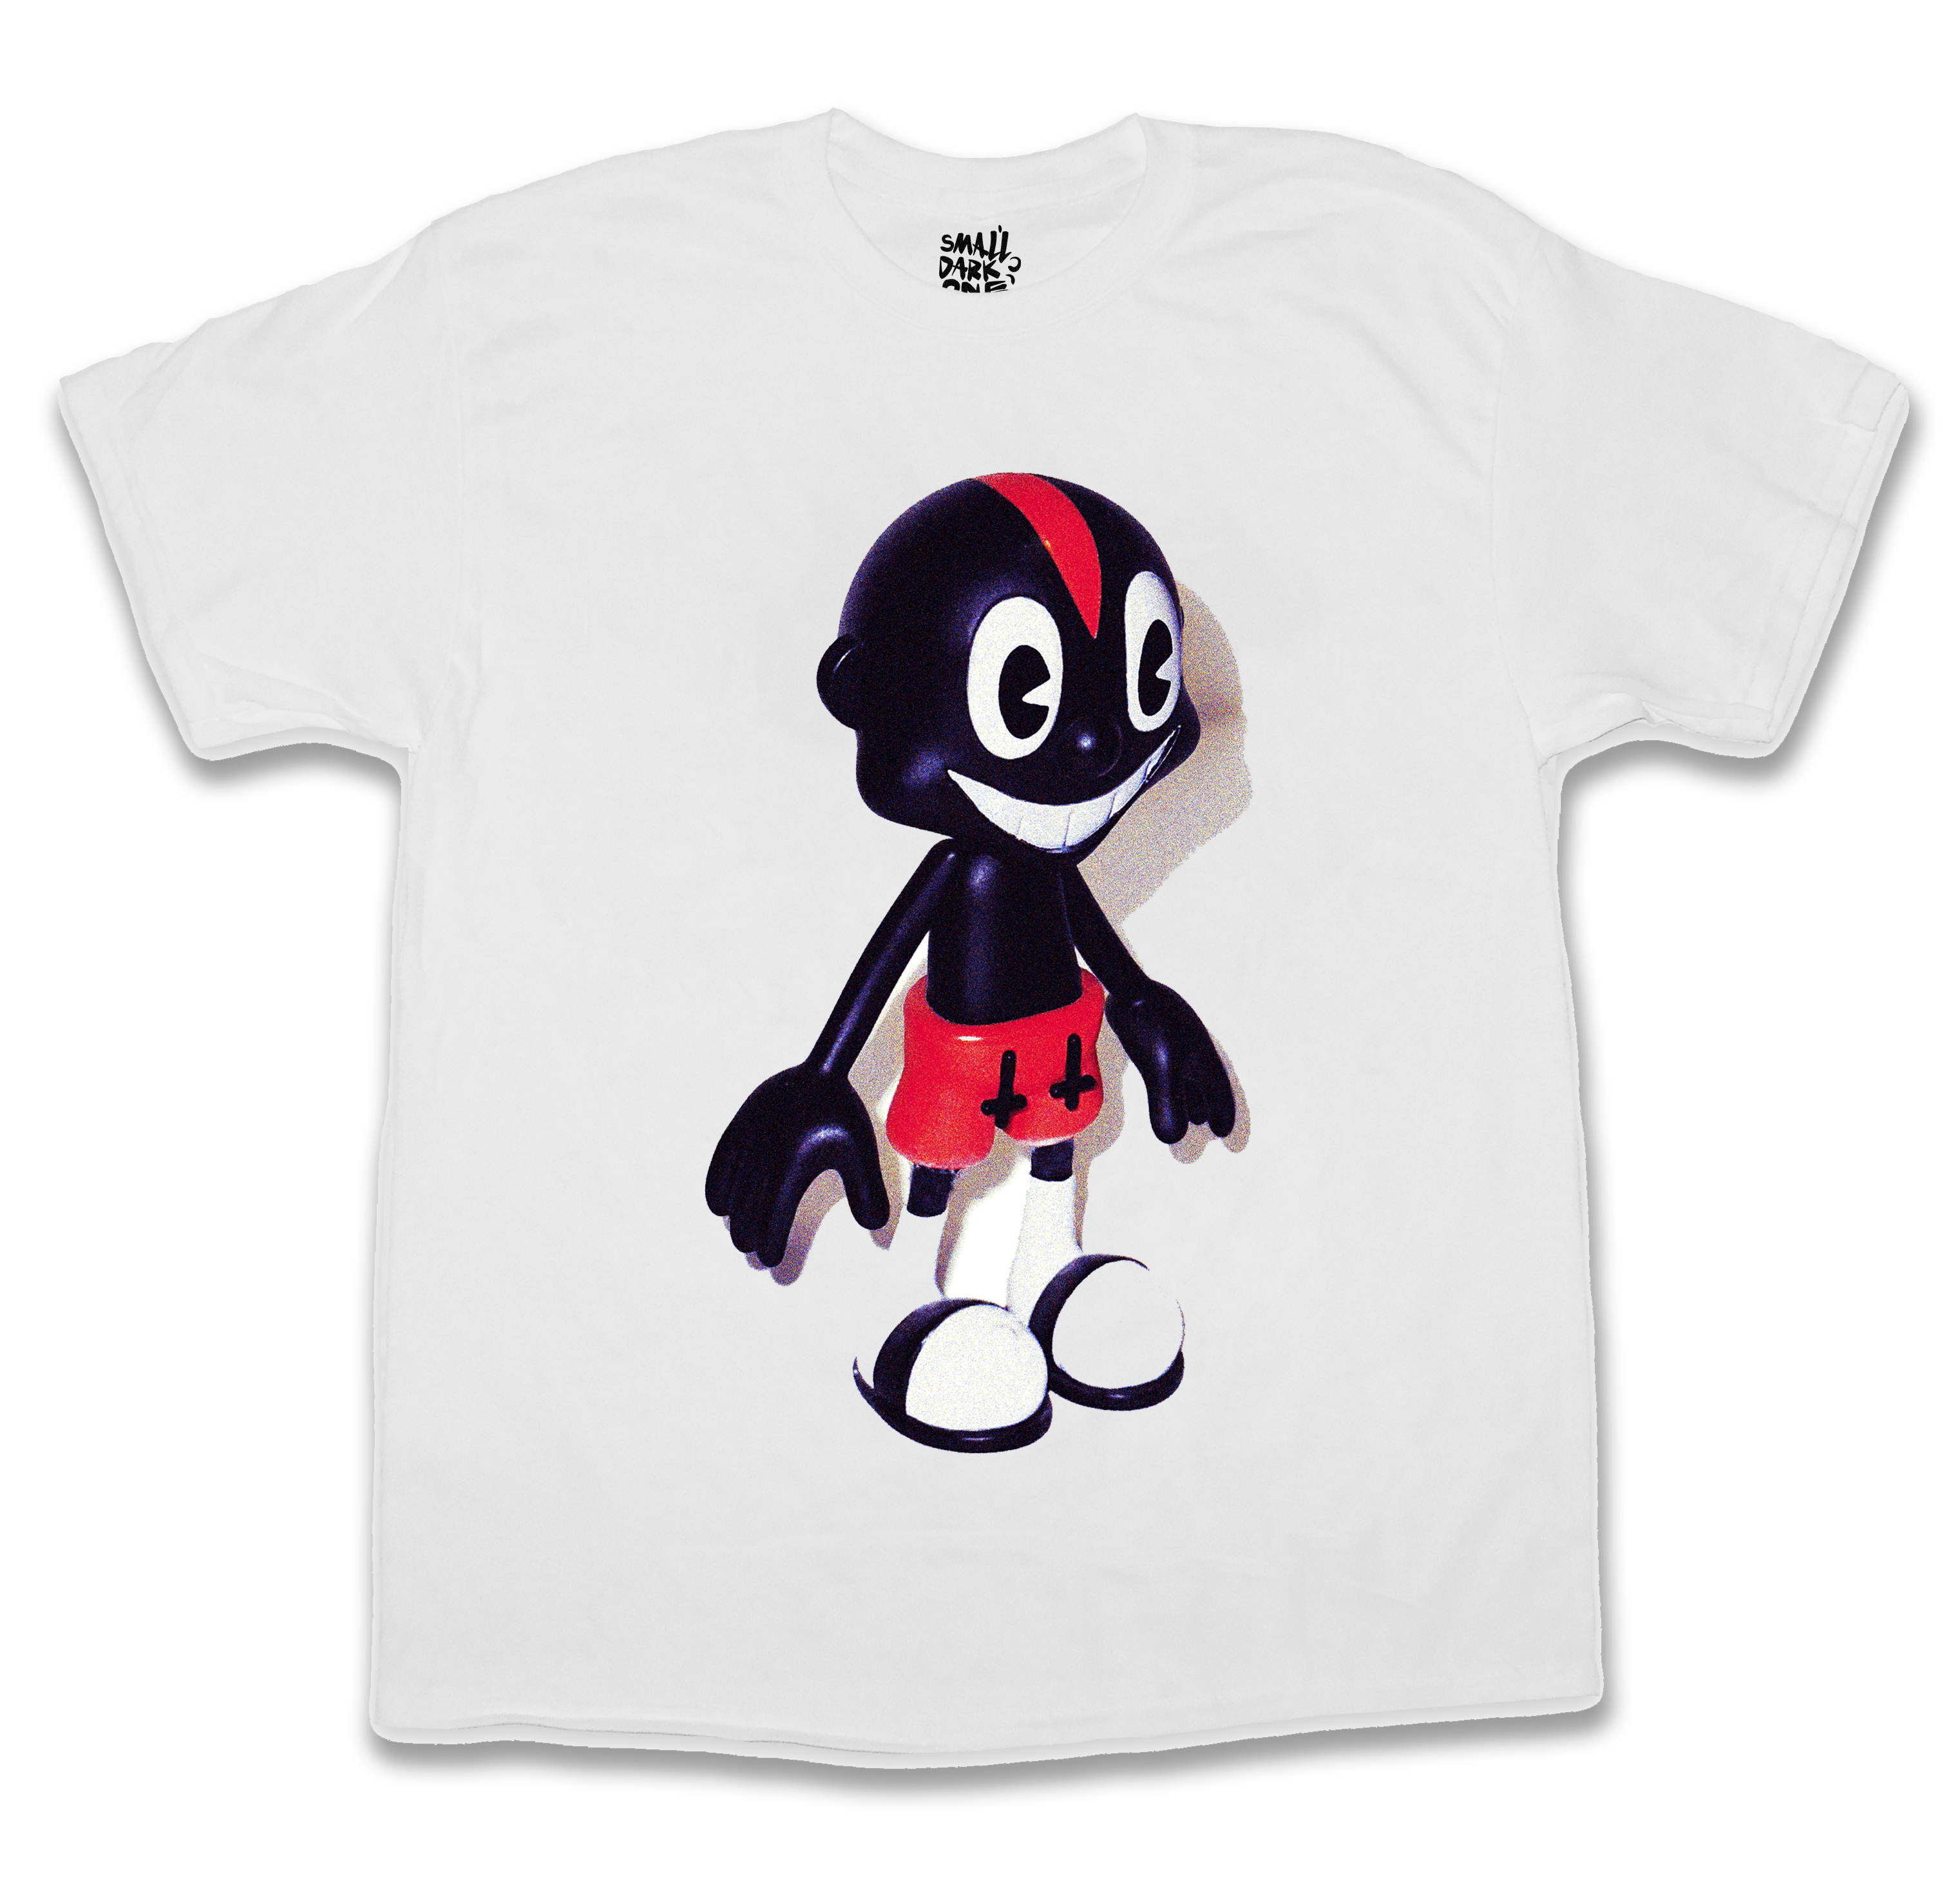 Lil Darkie chatacter deisgn of the Toy Tee Shirt on Small Dark One